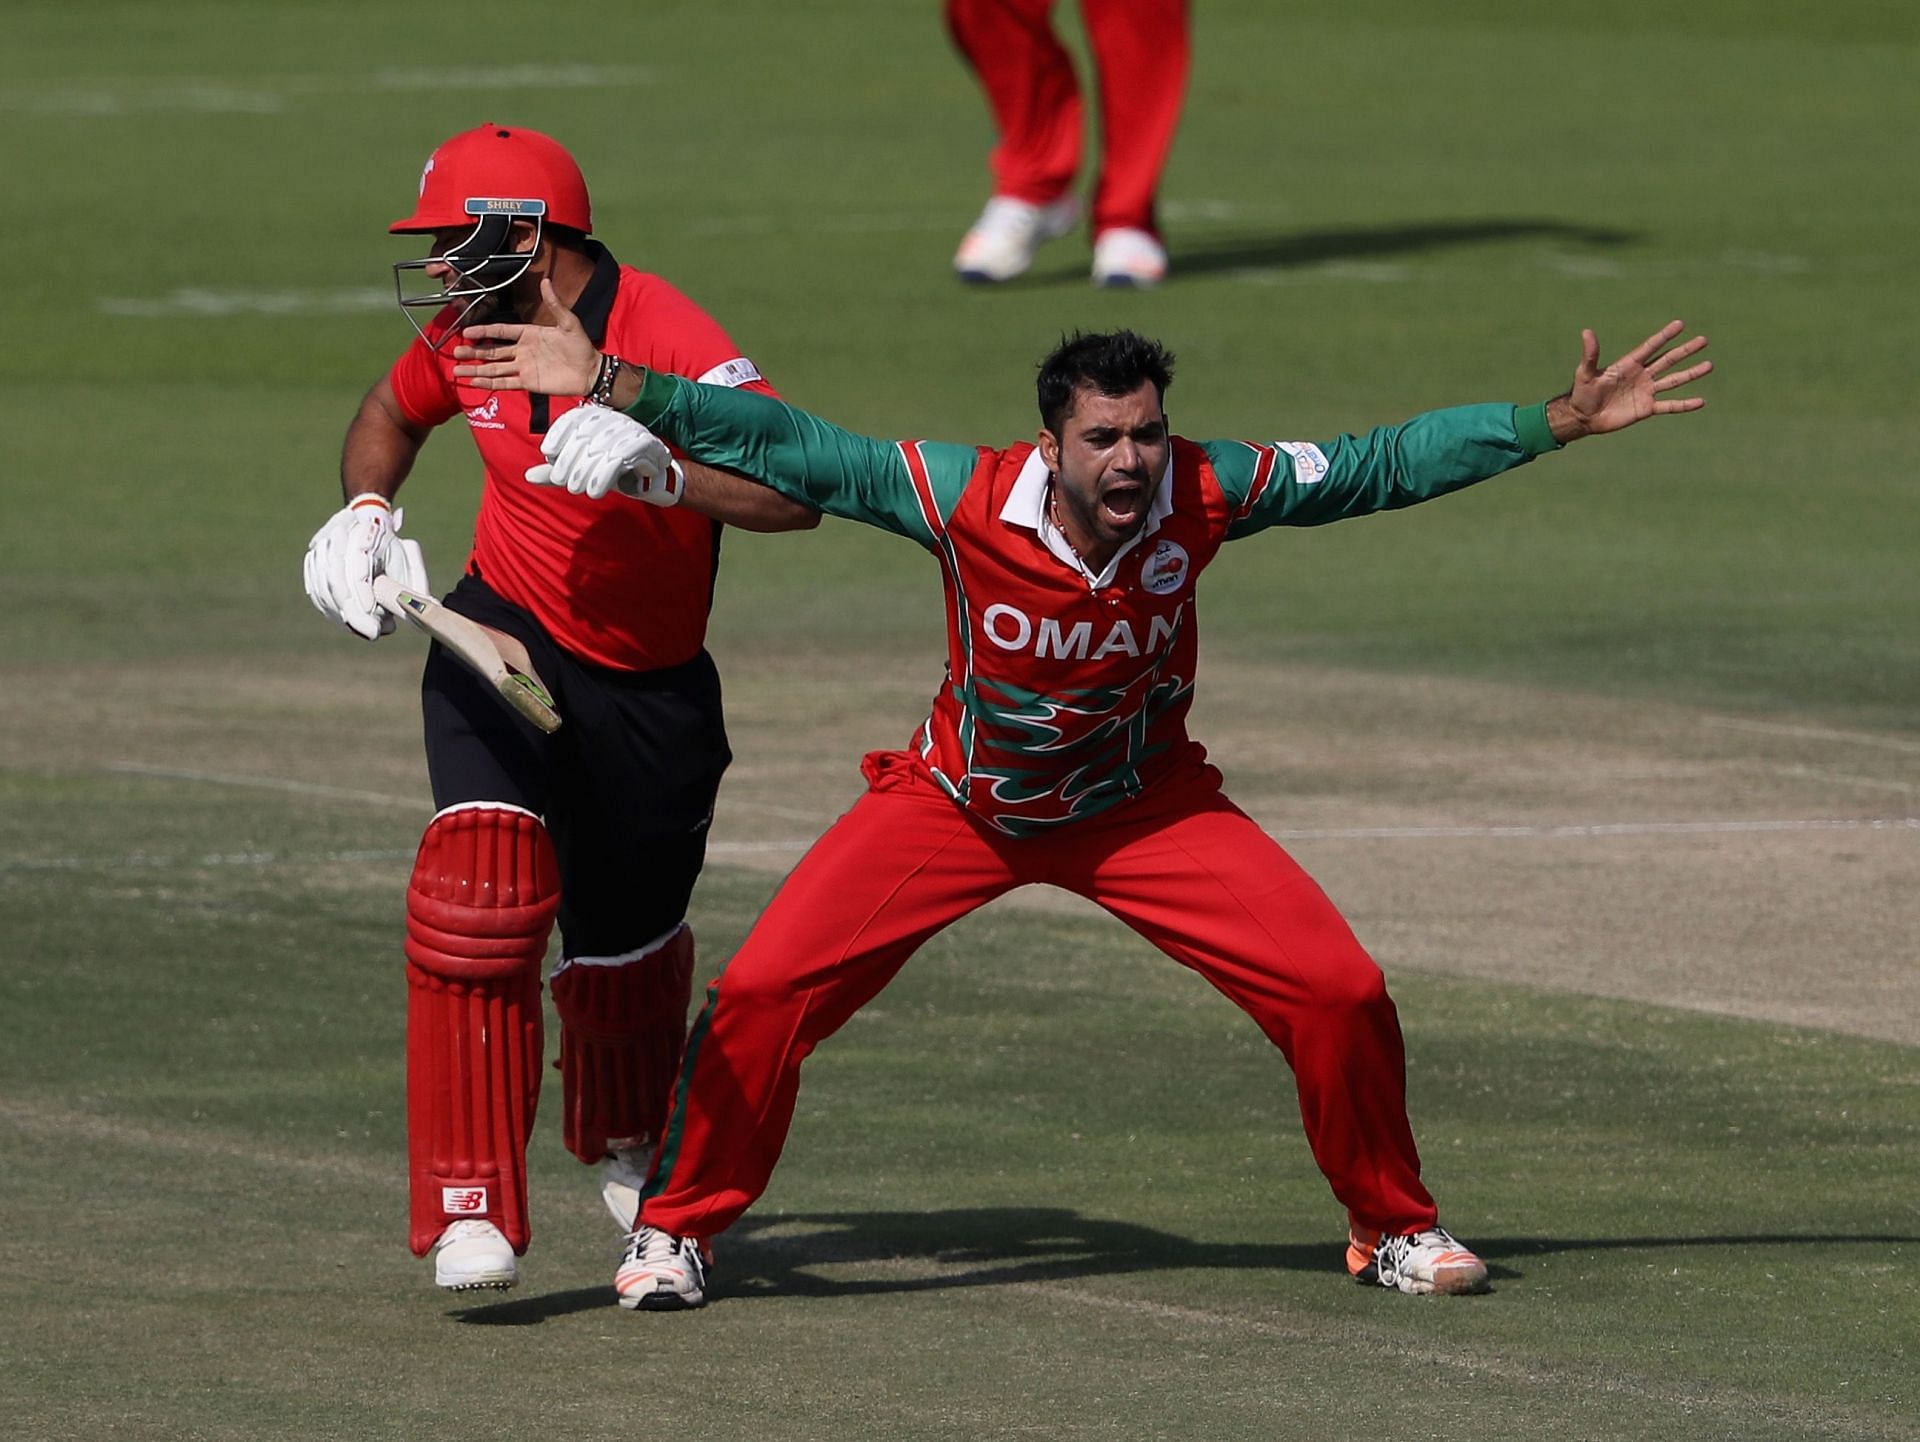 Bilal Khan is the leading wicket-taker in the competition